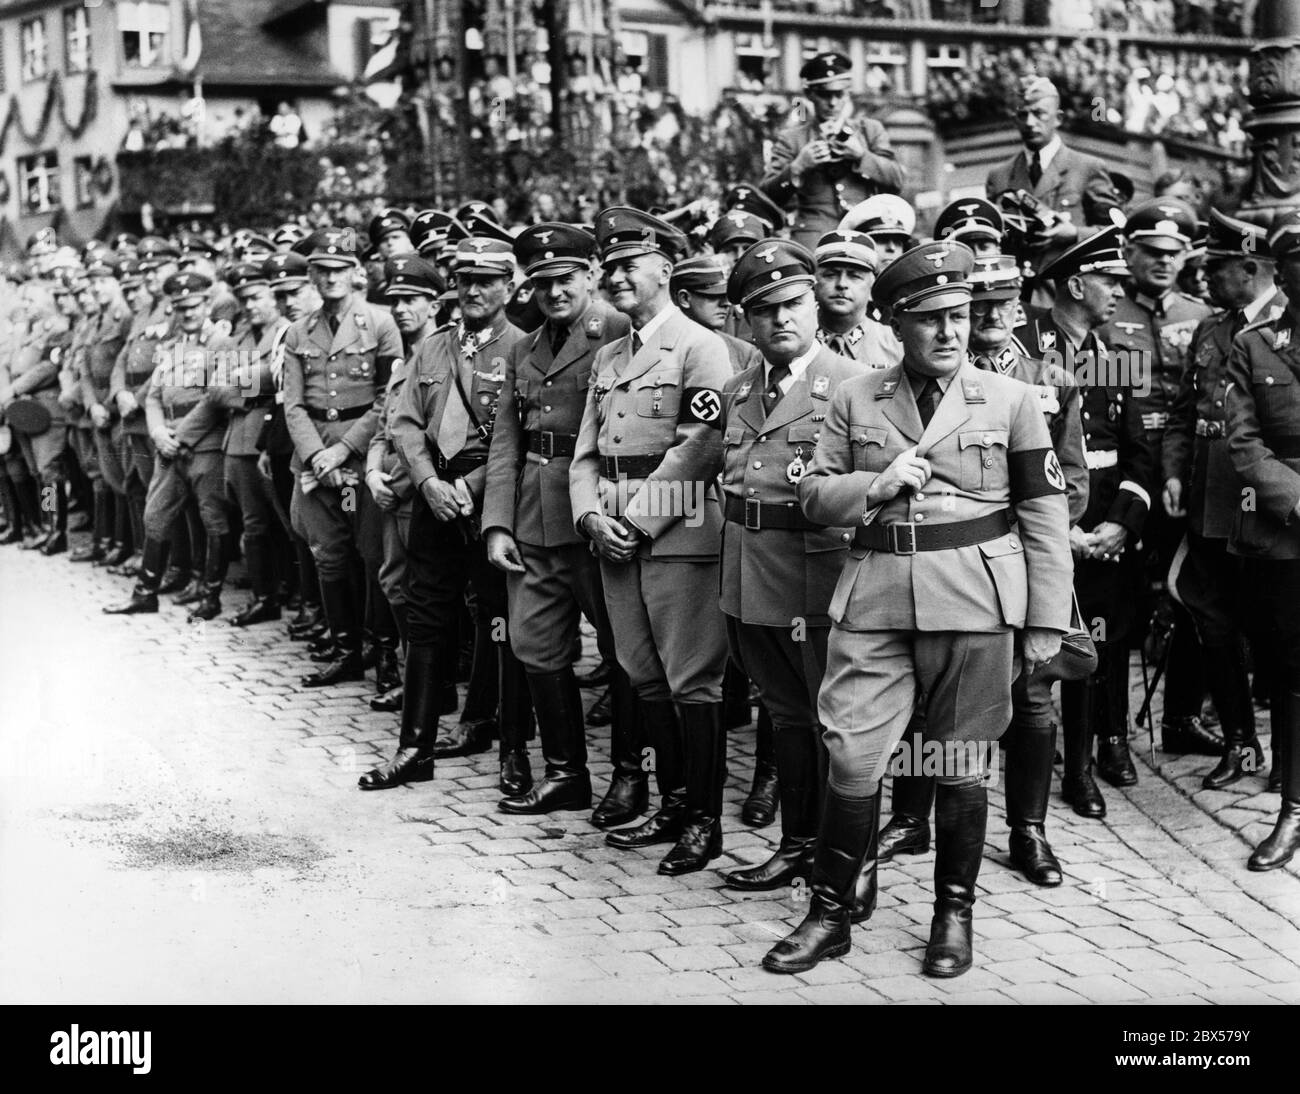 From right to left: Martin Bormann, Robert Ley, Wilhelm Frick, Hans Frank, Franz Ritter von Epp and Joseph Goebbels watch the parade of Nazi formations on Nuremberg's Main Market Square. 3rd row far right, Adjutant Julius Schaub. In the background, the Schoener Brunnen. Stock Photo